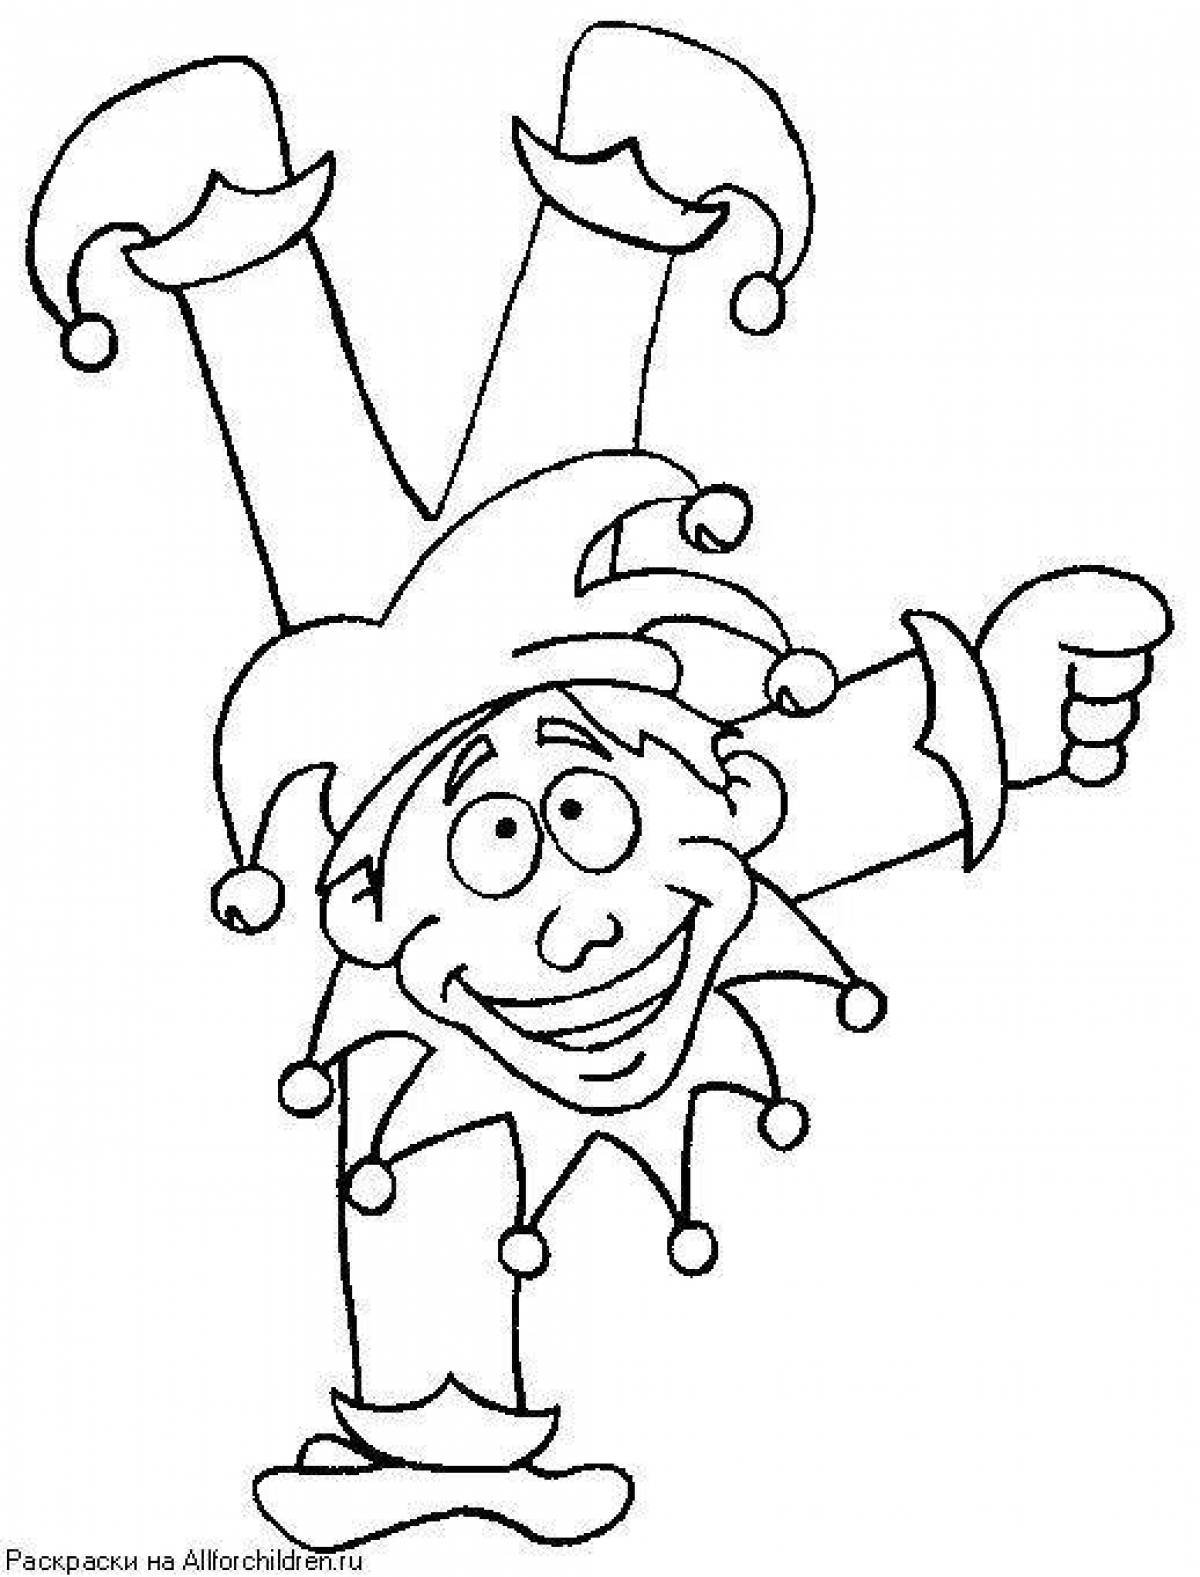 Glamour jester coloring page